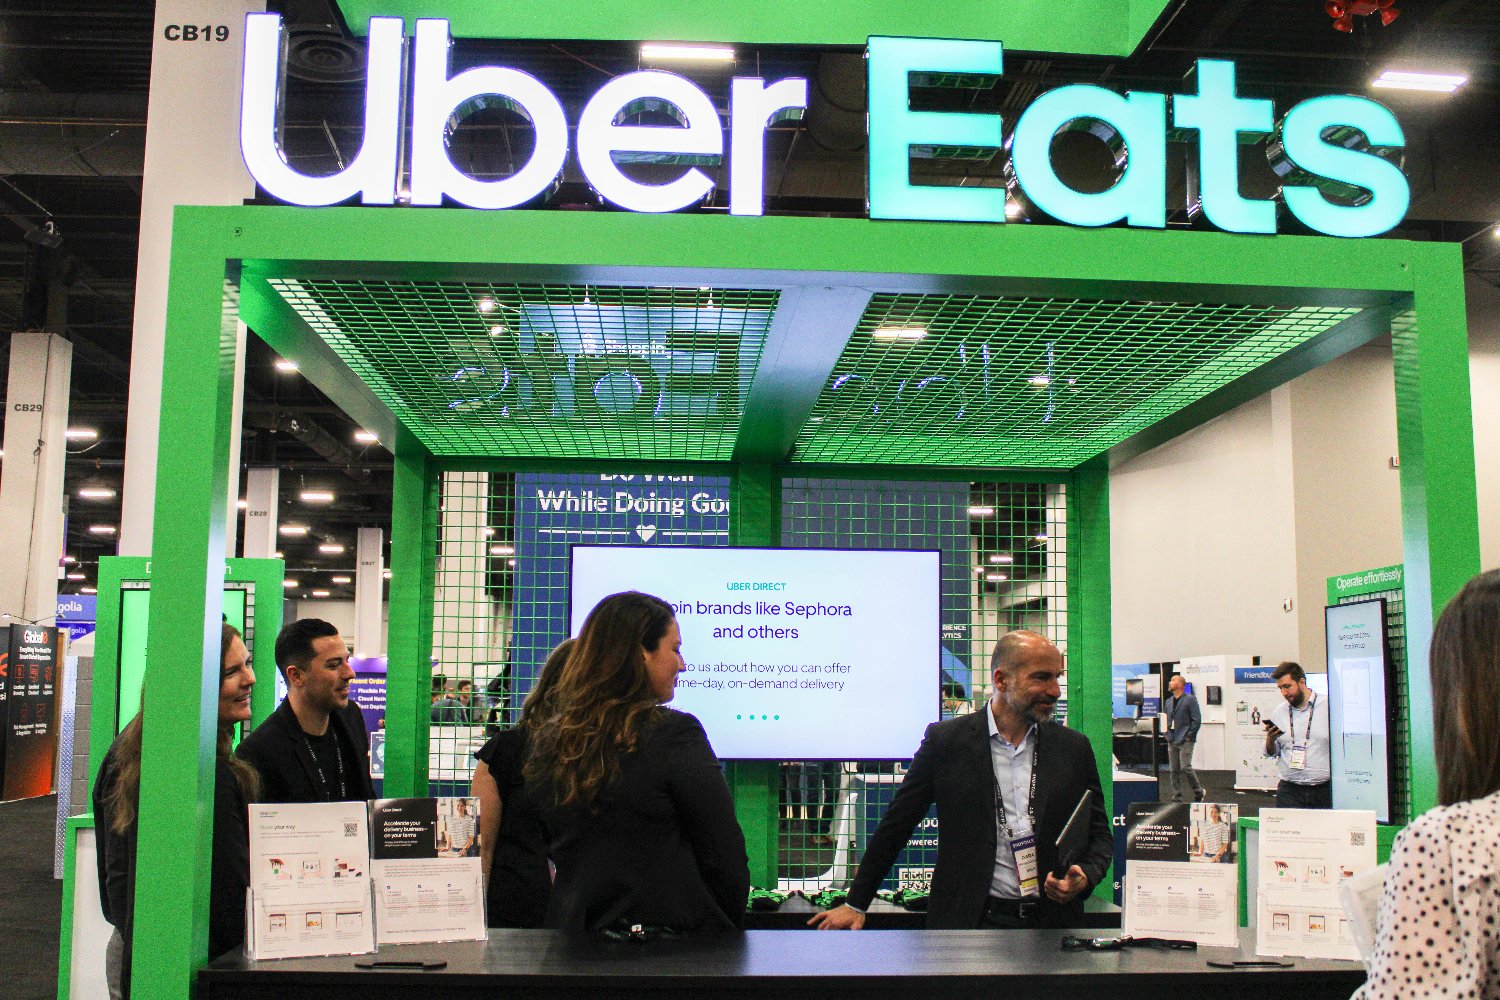 Team Uber Eats at the booth